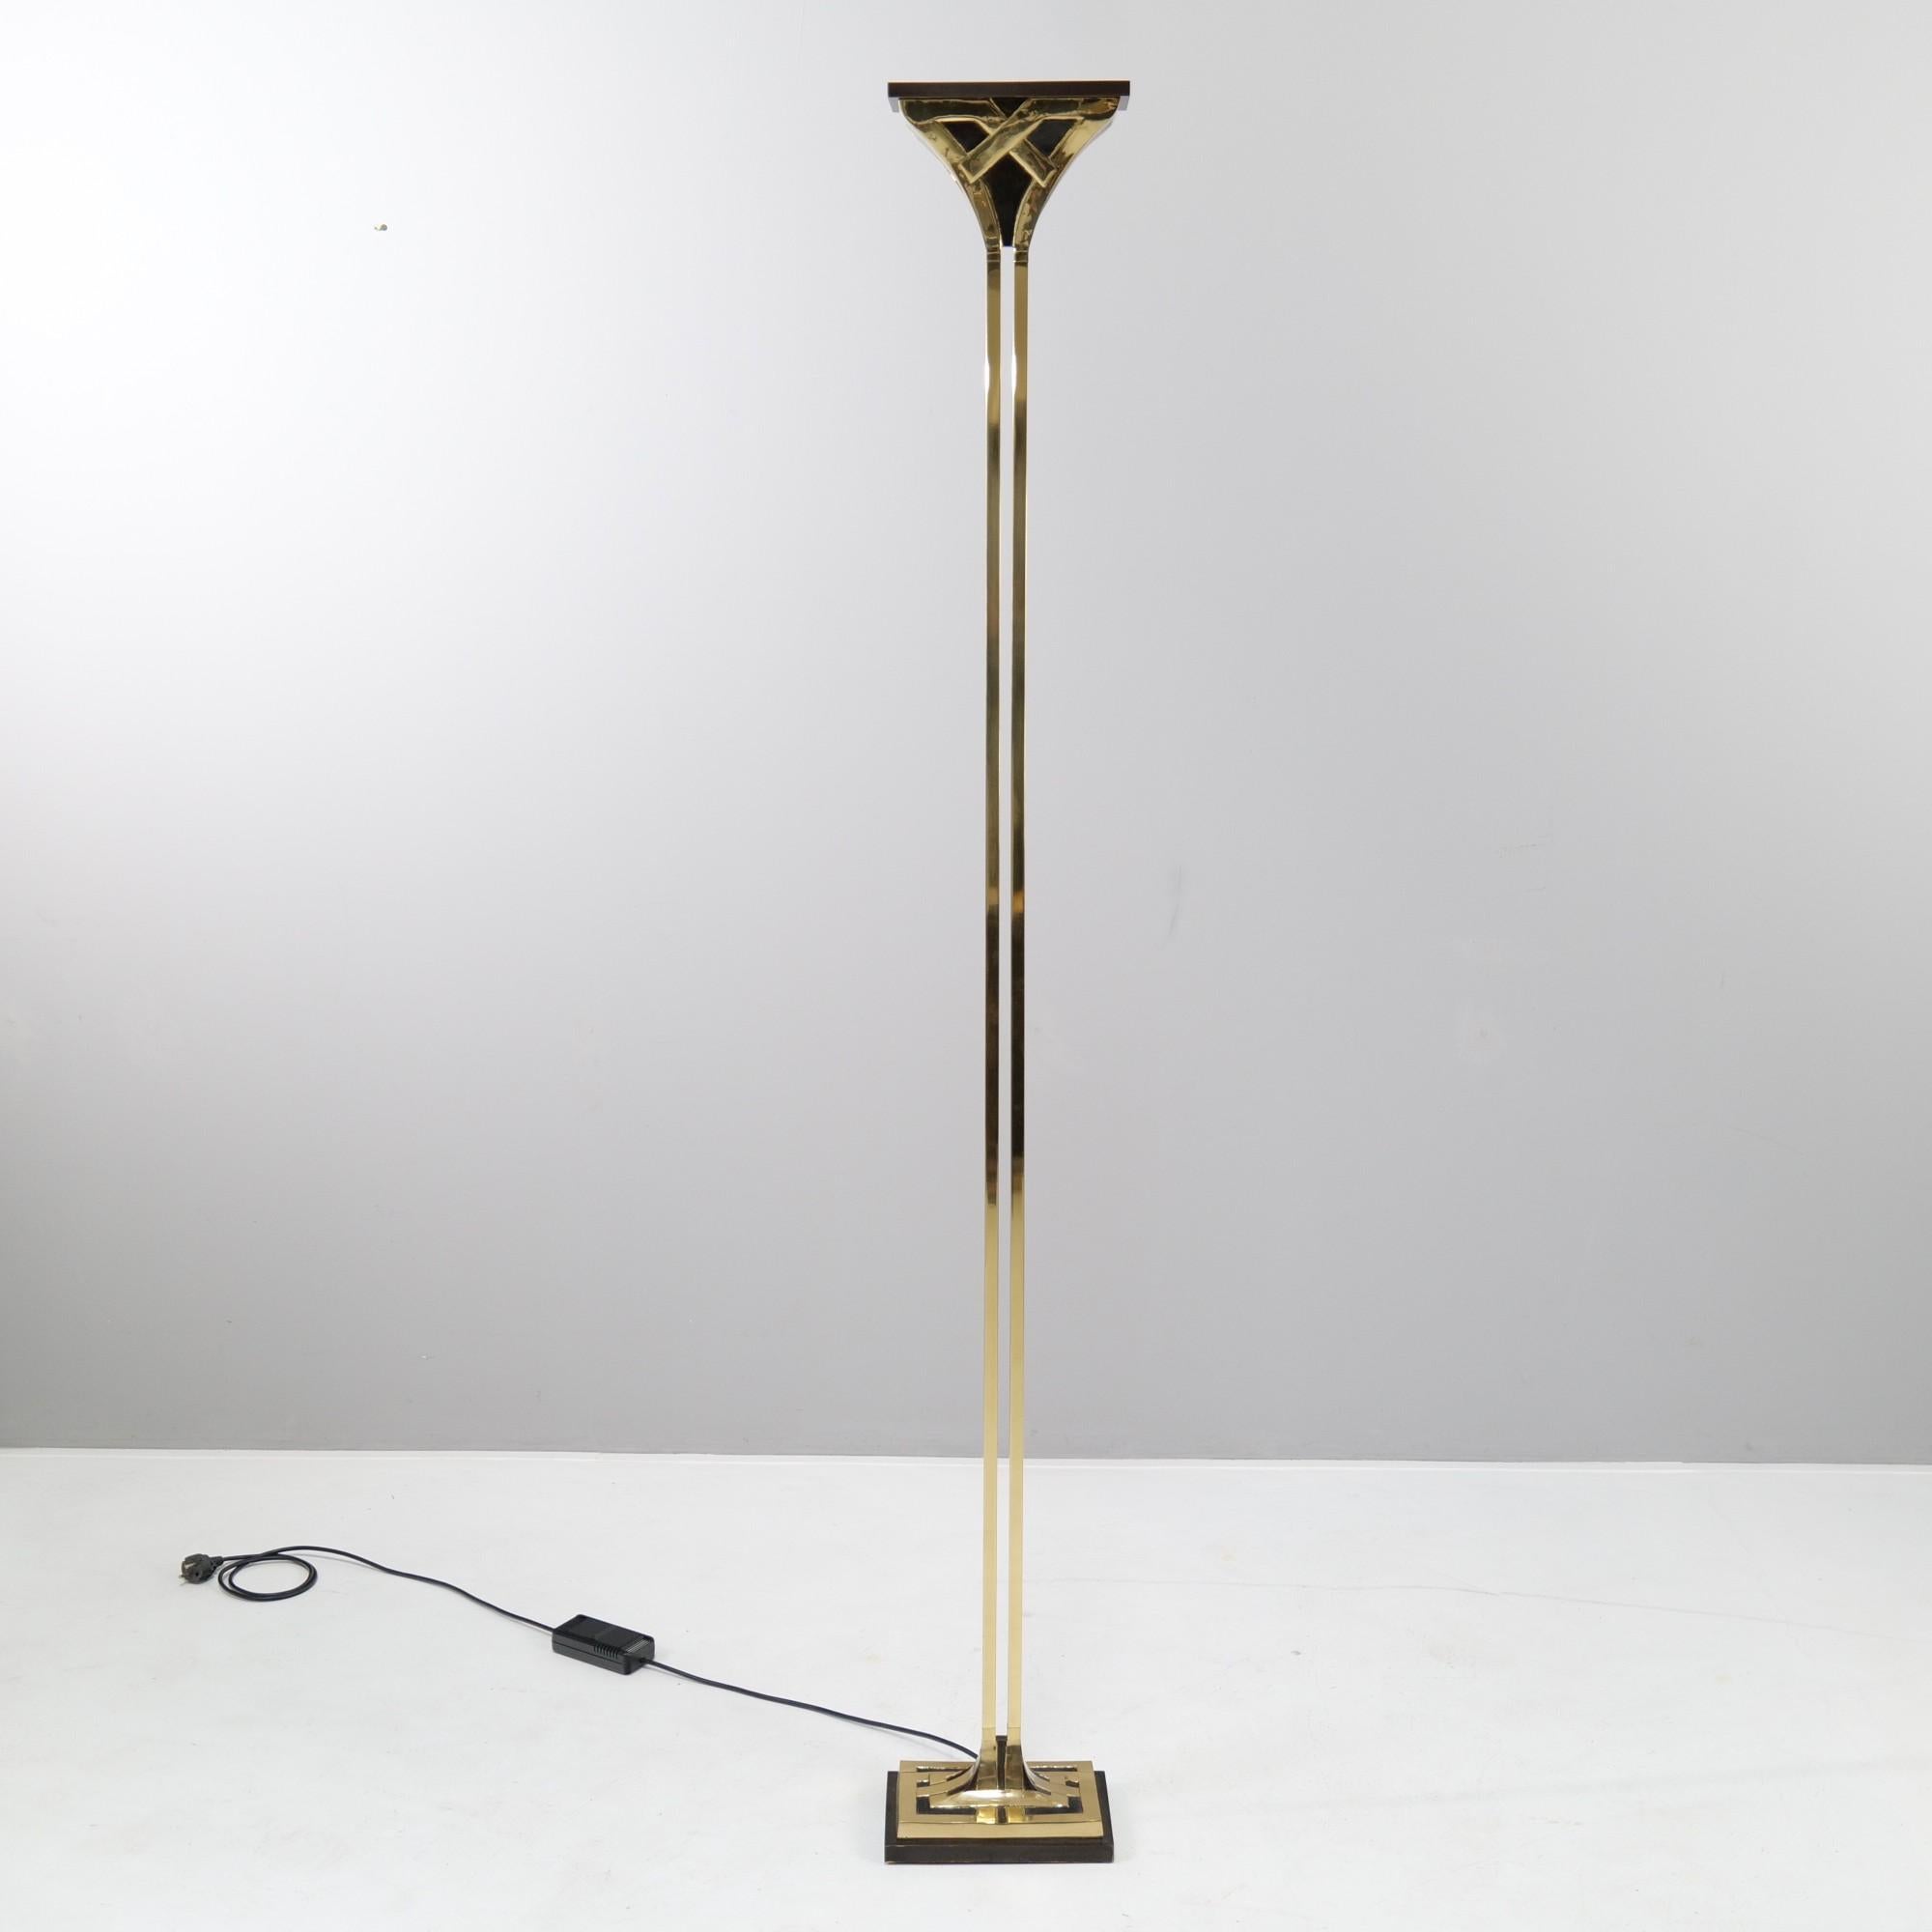 Regency Hollywood dimmable bronze floor lamp.

Good condition with slight signs of use.

The entire lamp is crafted in bronze.